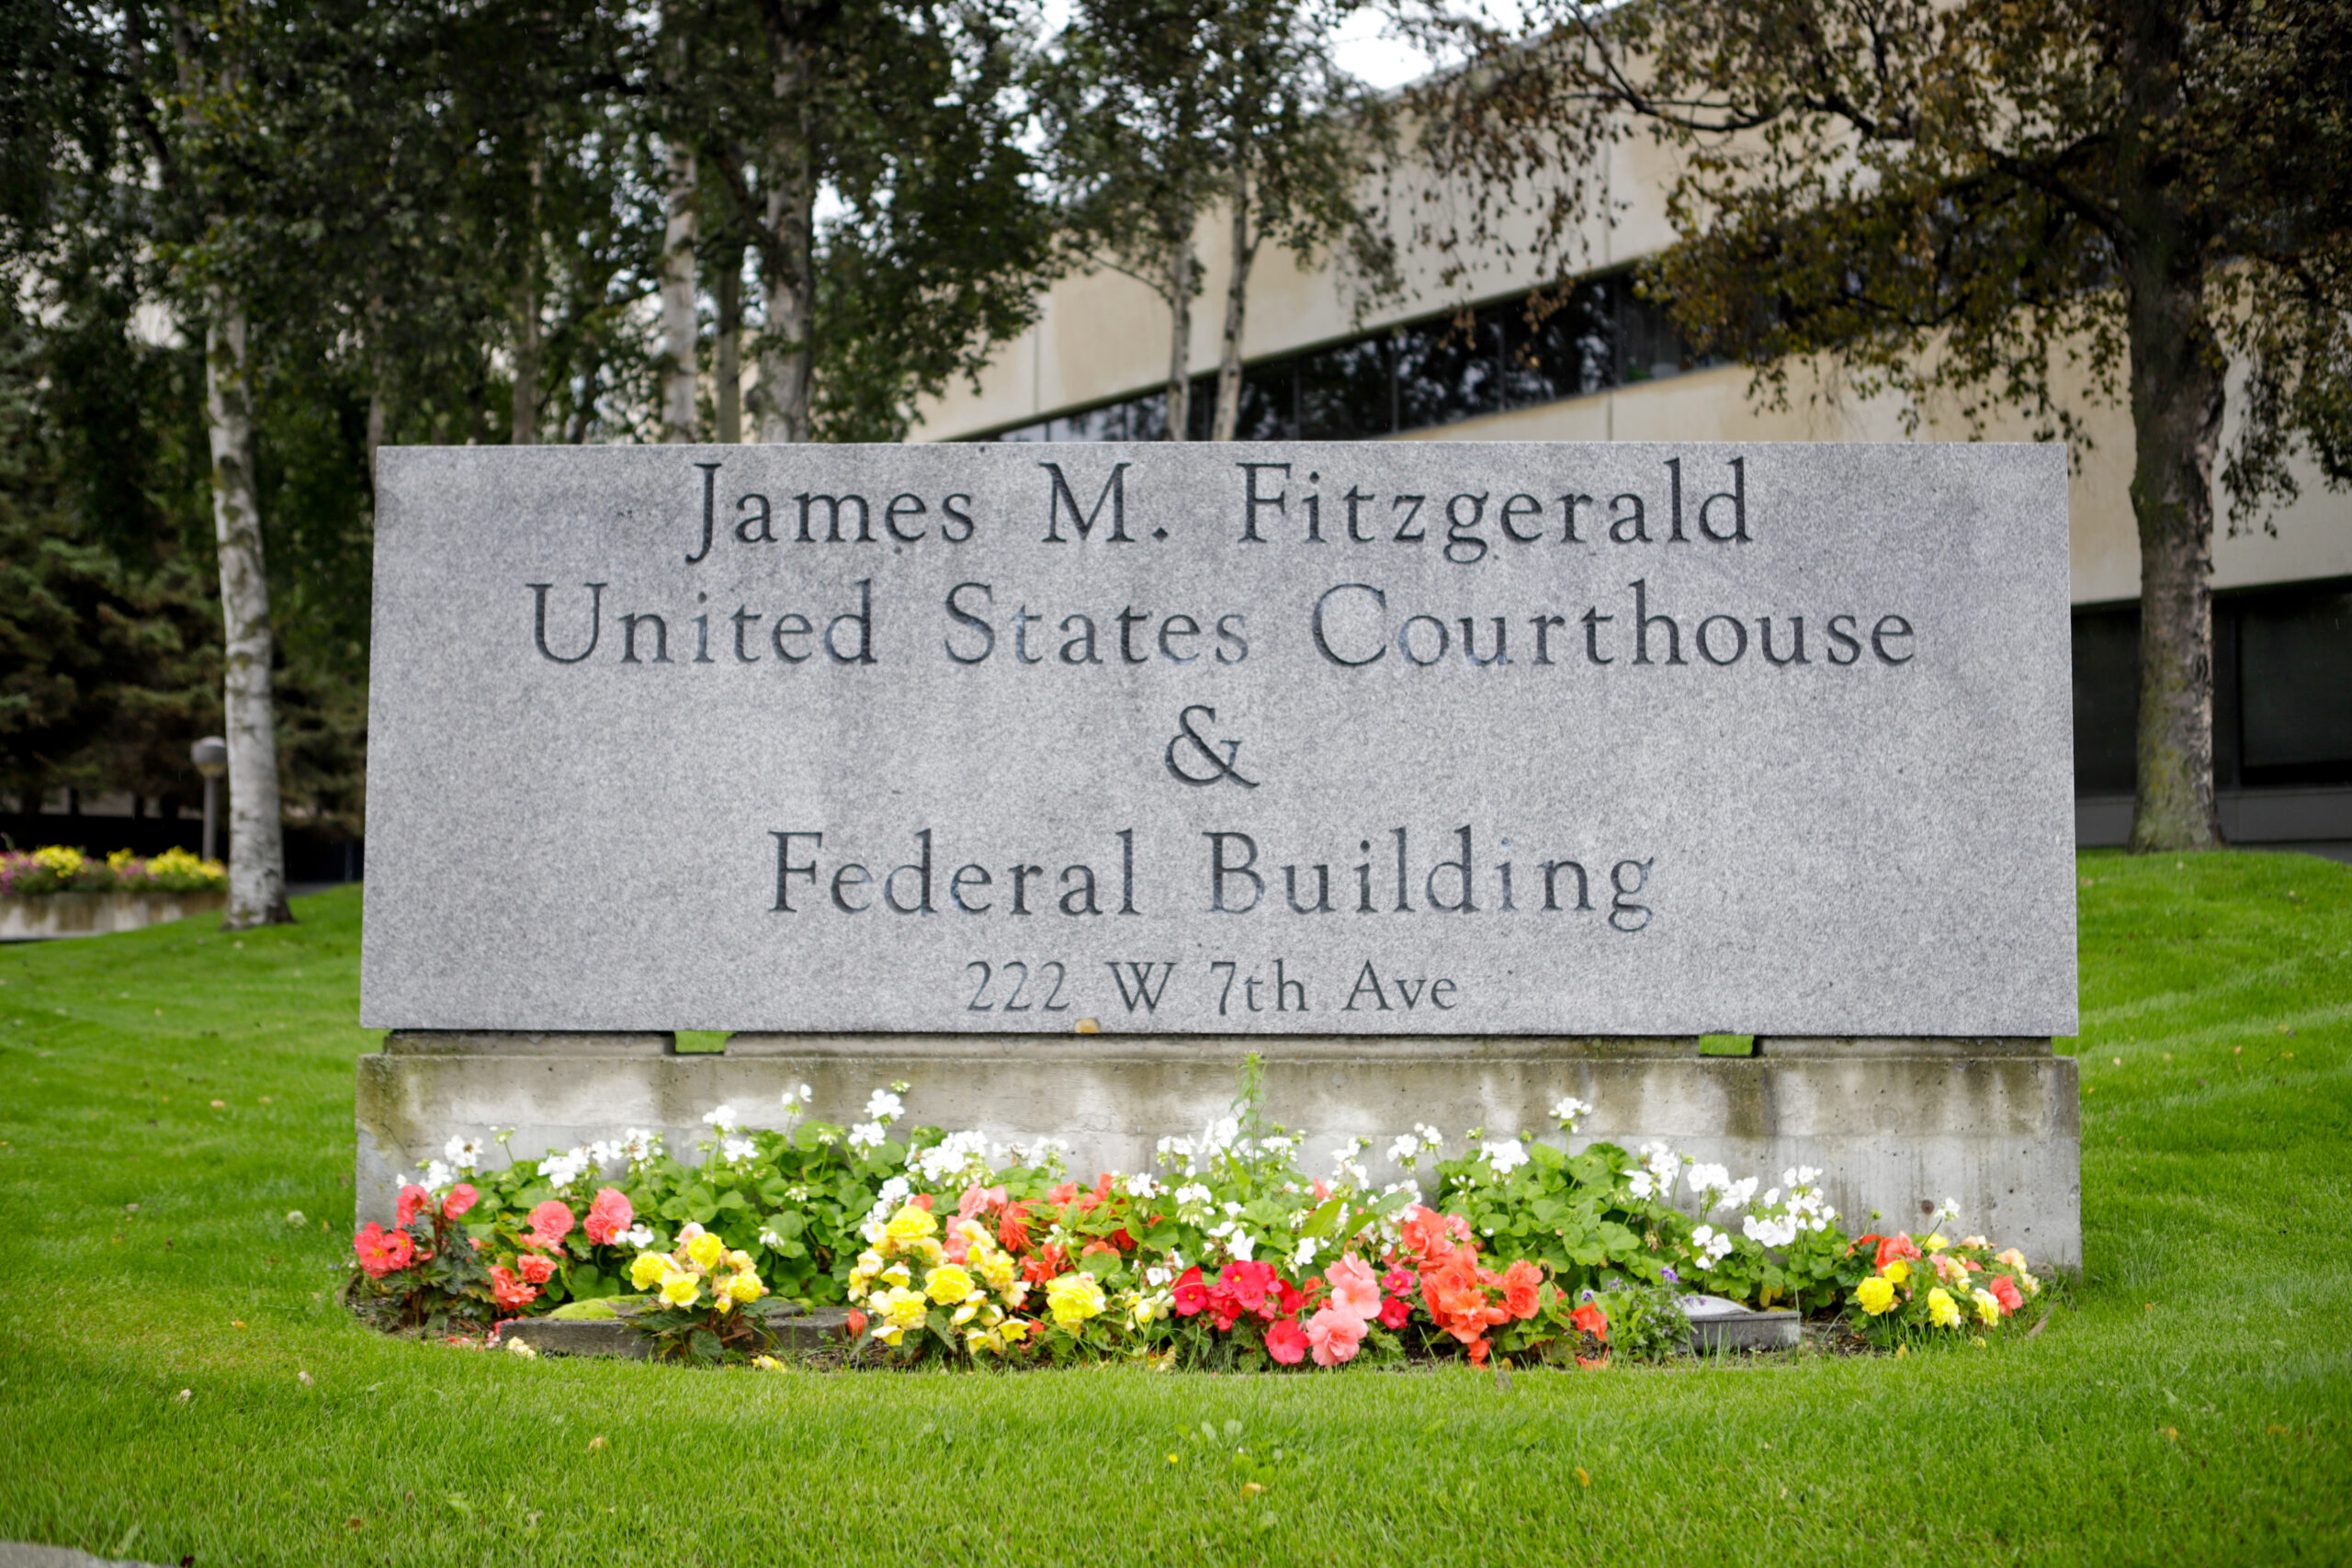 A stone sign in the middle of a lawn reads "James M. Fitzgerald United States Courthouse & Federal Building." In front of the sign are pink, yellow and orange flowers.